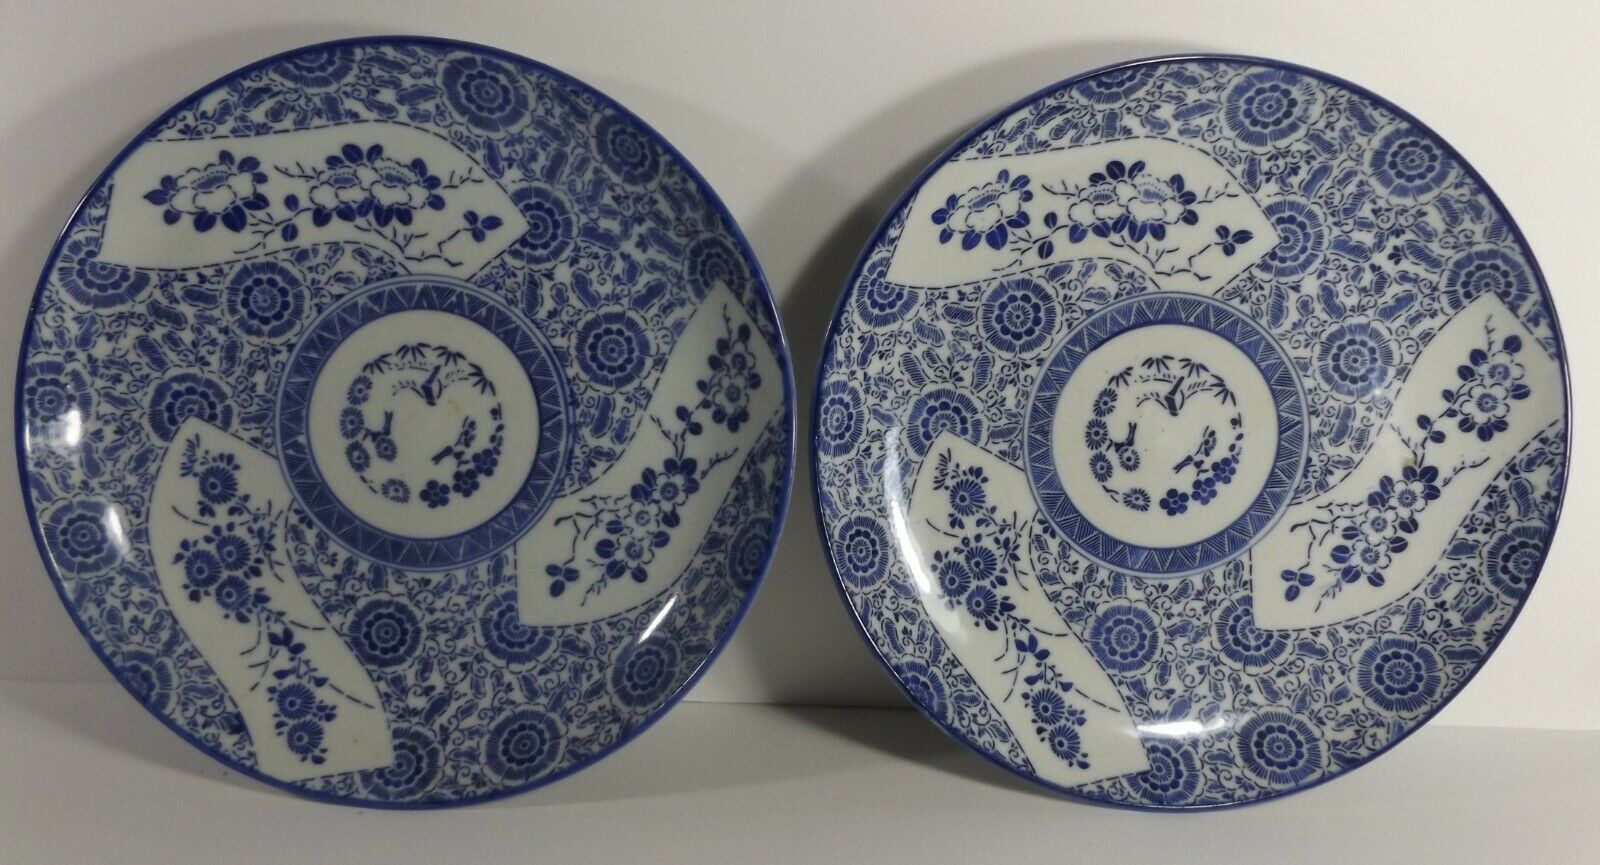 Pair Of Excellent Antique Chinese Blue & White Charger Plates 11-1/4" x 1-3/4”